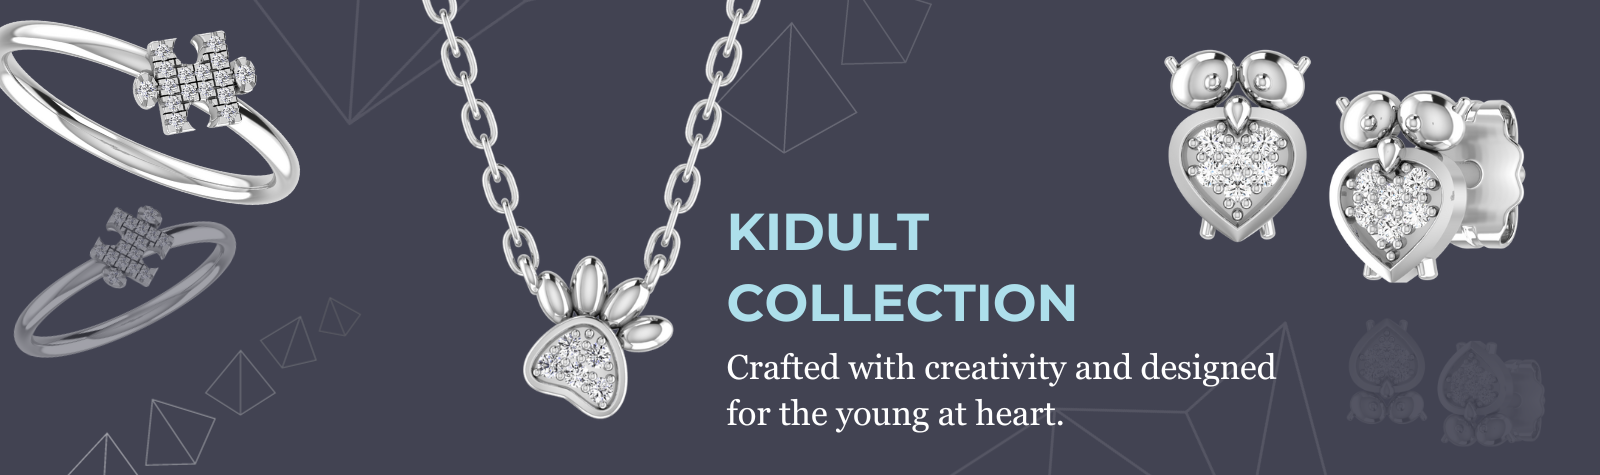 Kids Kidults Collection